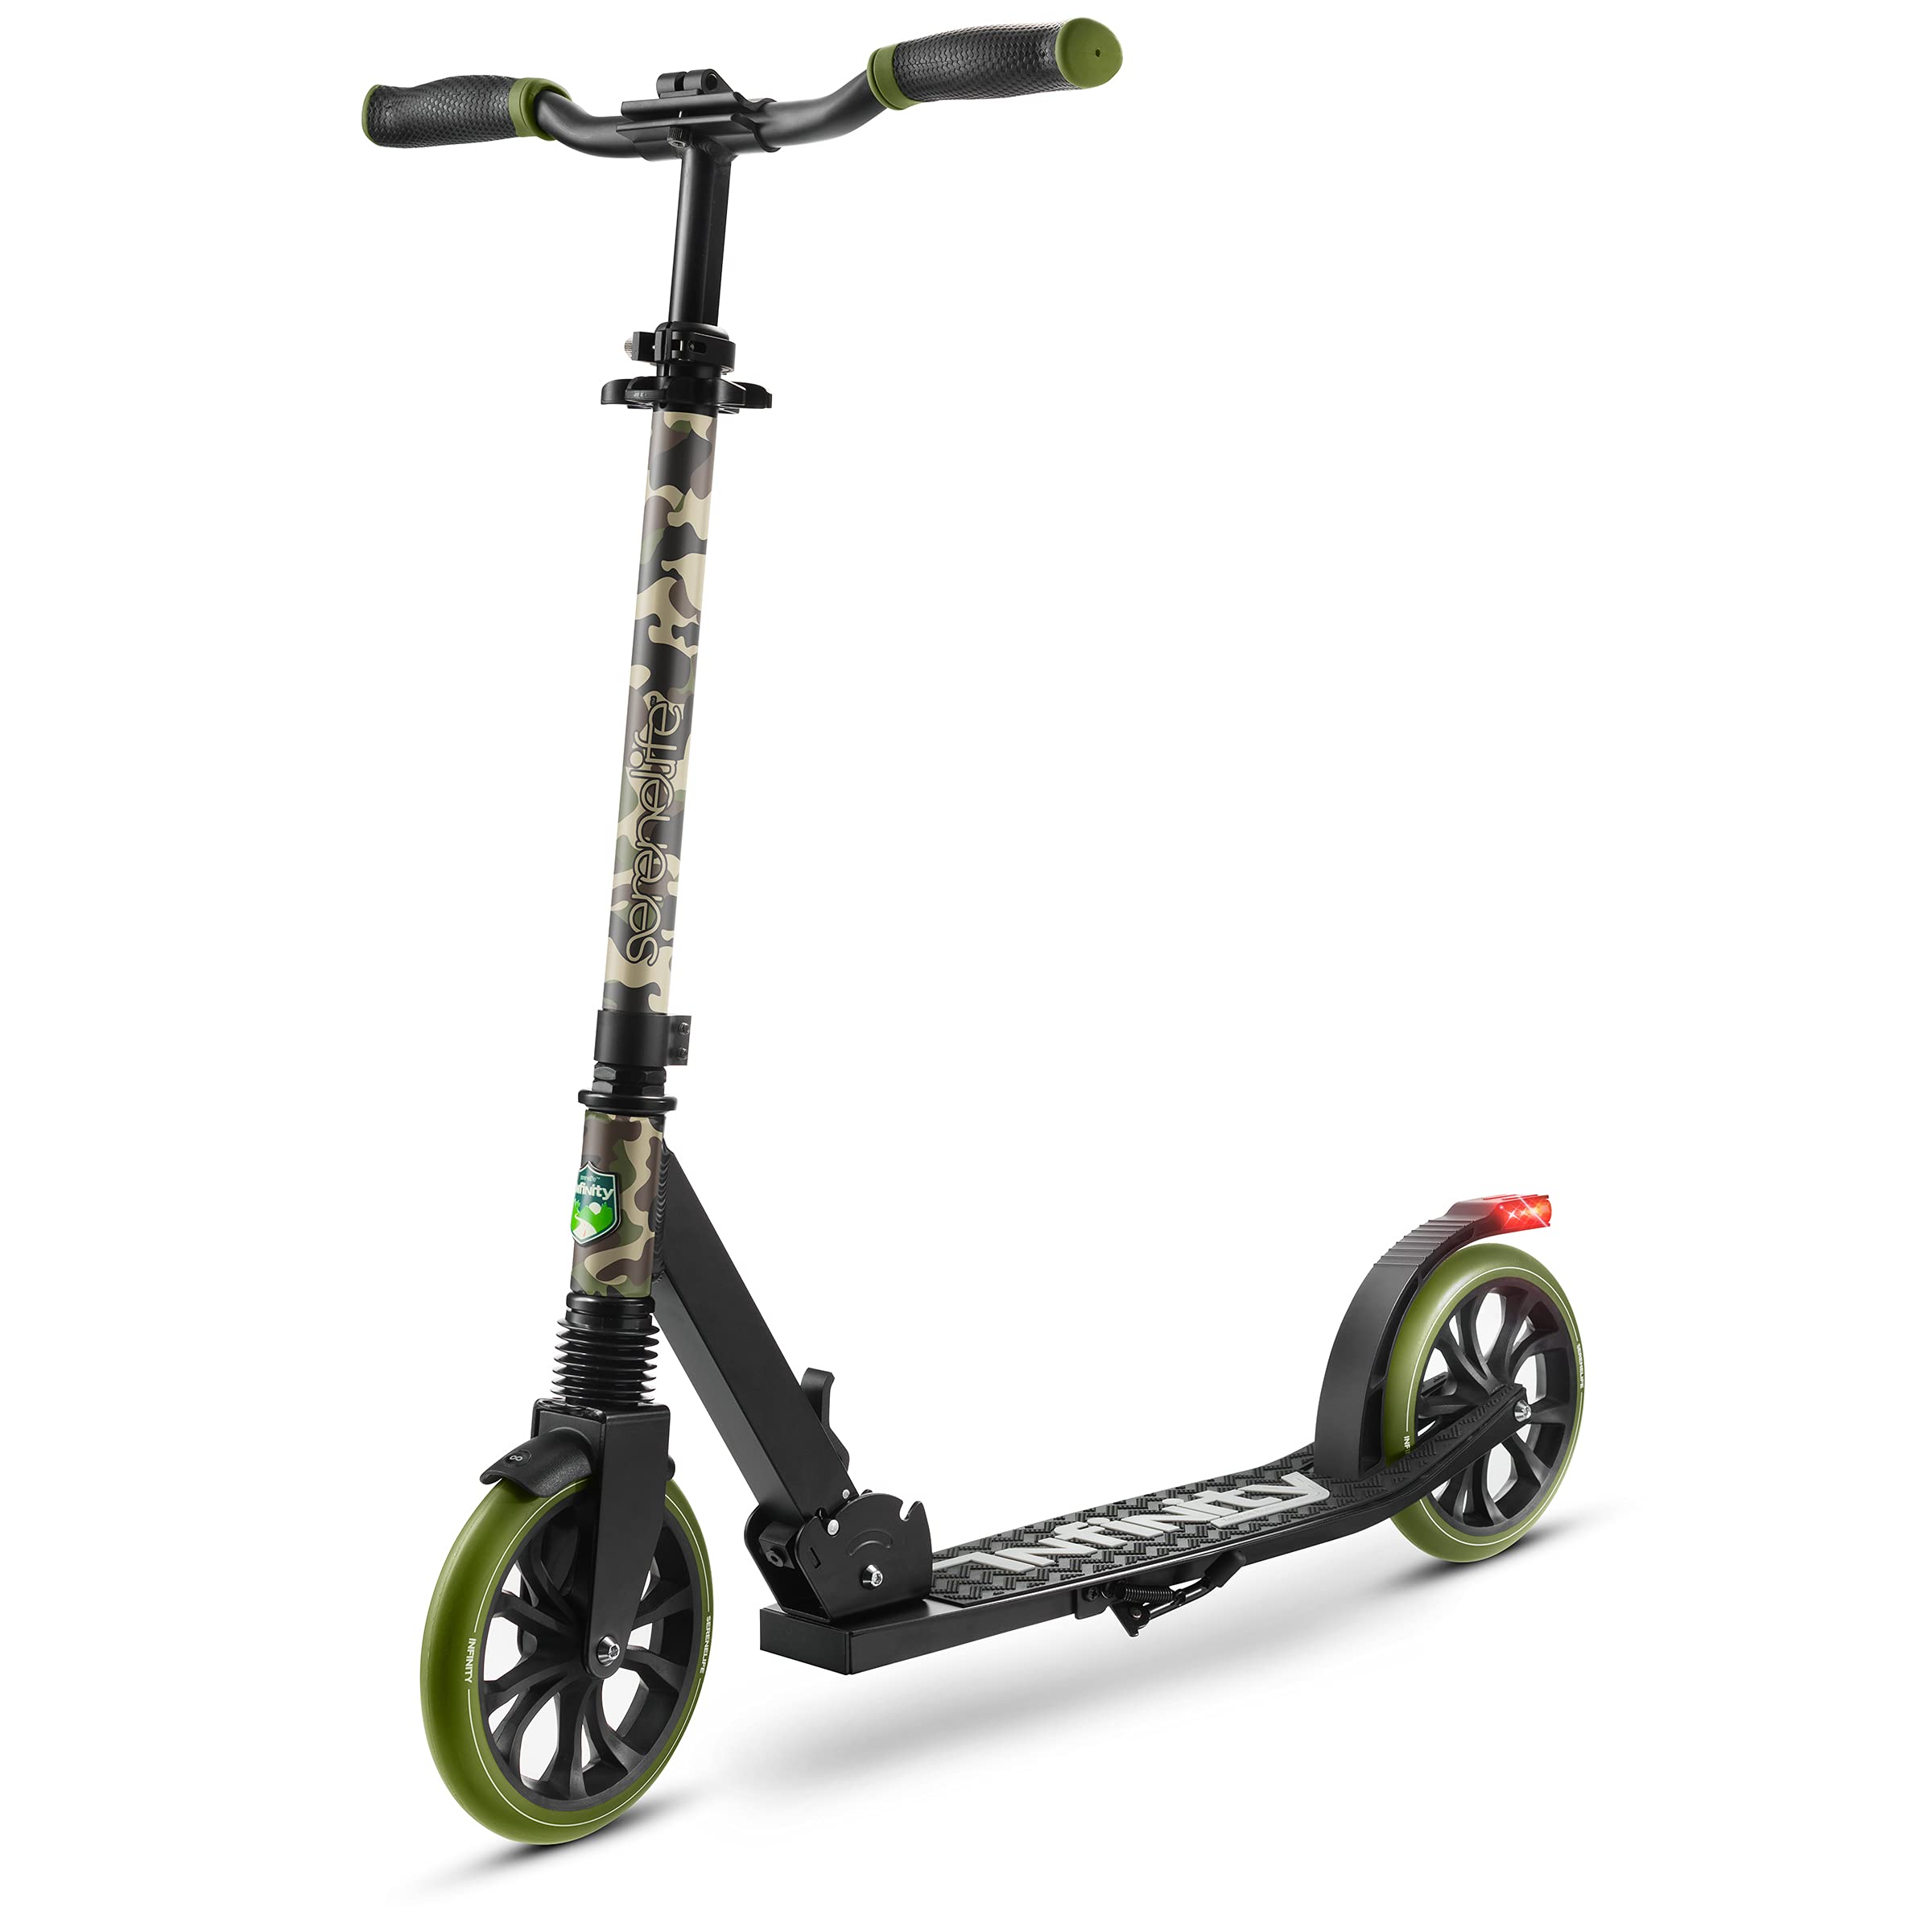 SereneLife Foldable Kick Scooter - Stand Kick Scooter for Teens and Adults with Rubber grip at Tip, Alloy Deck, Adjustable T-Bar